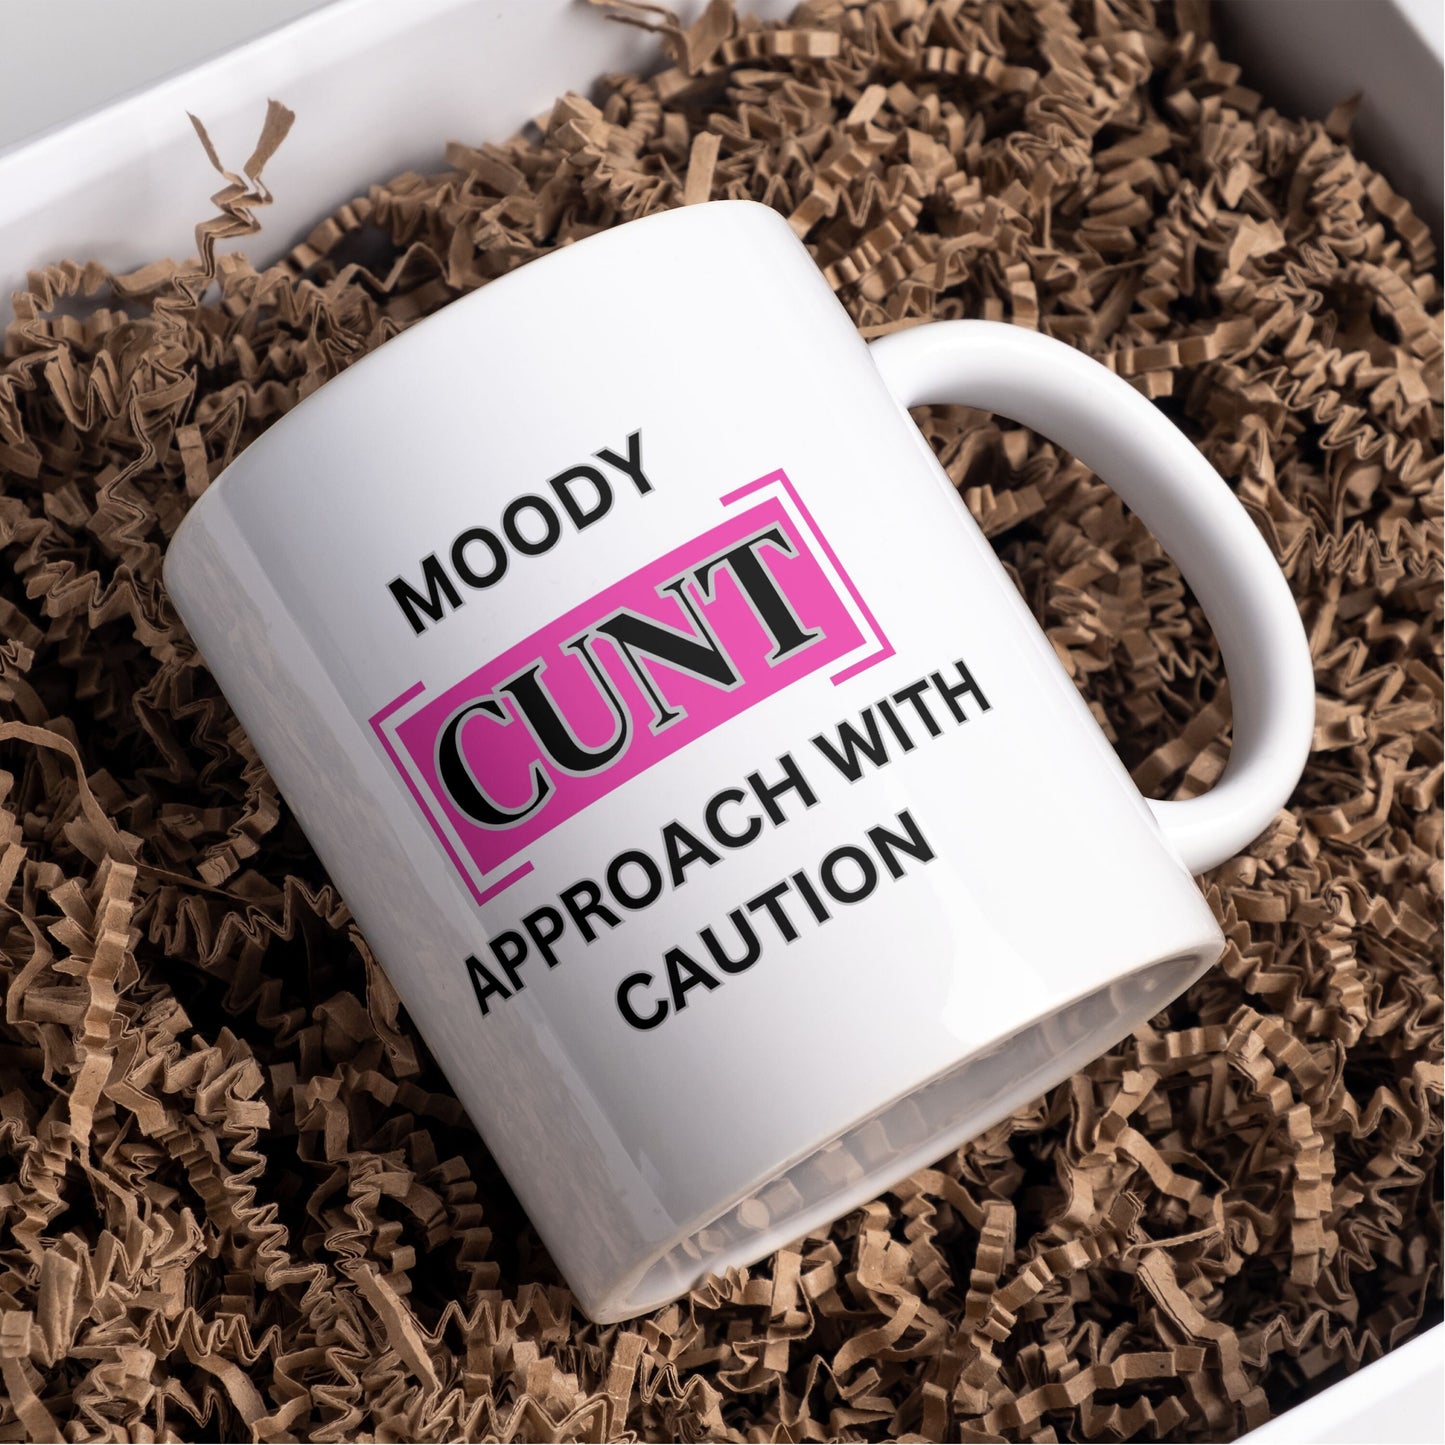 Moody Cunt Approach with caution funny mug